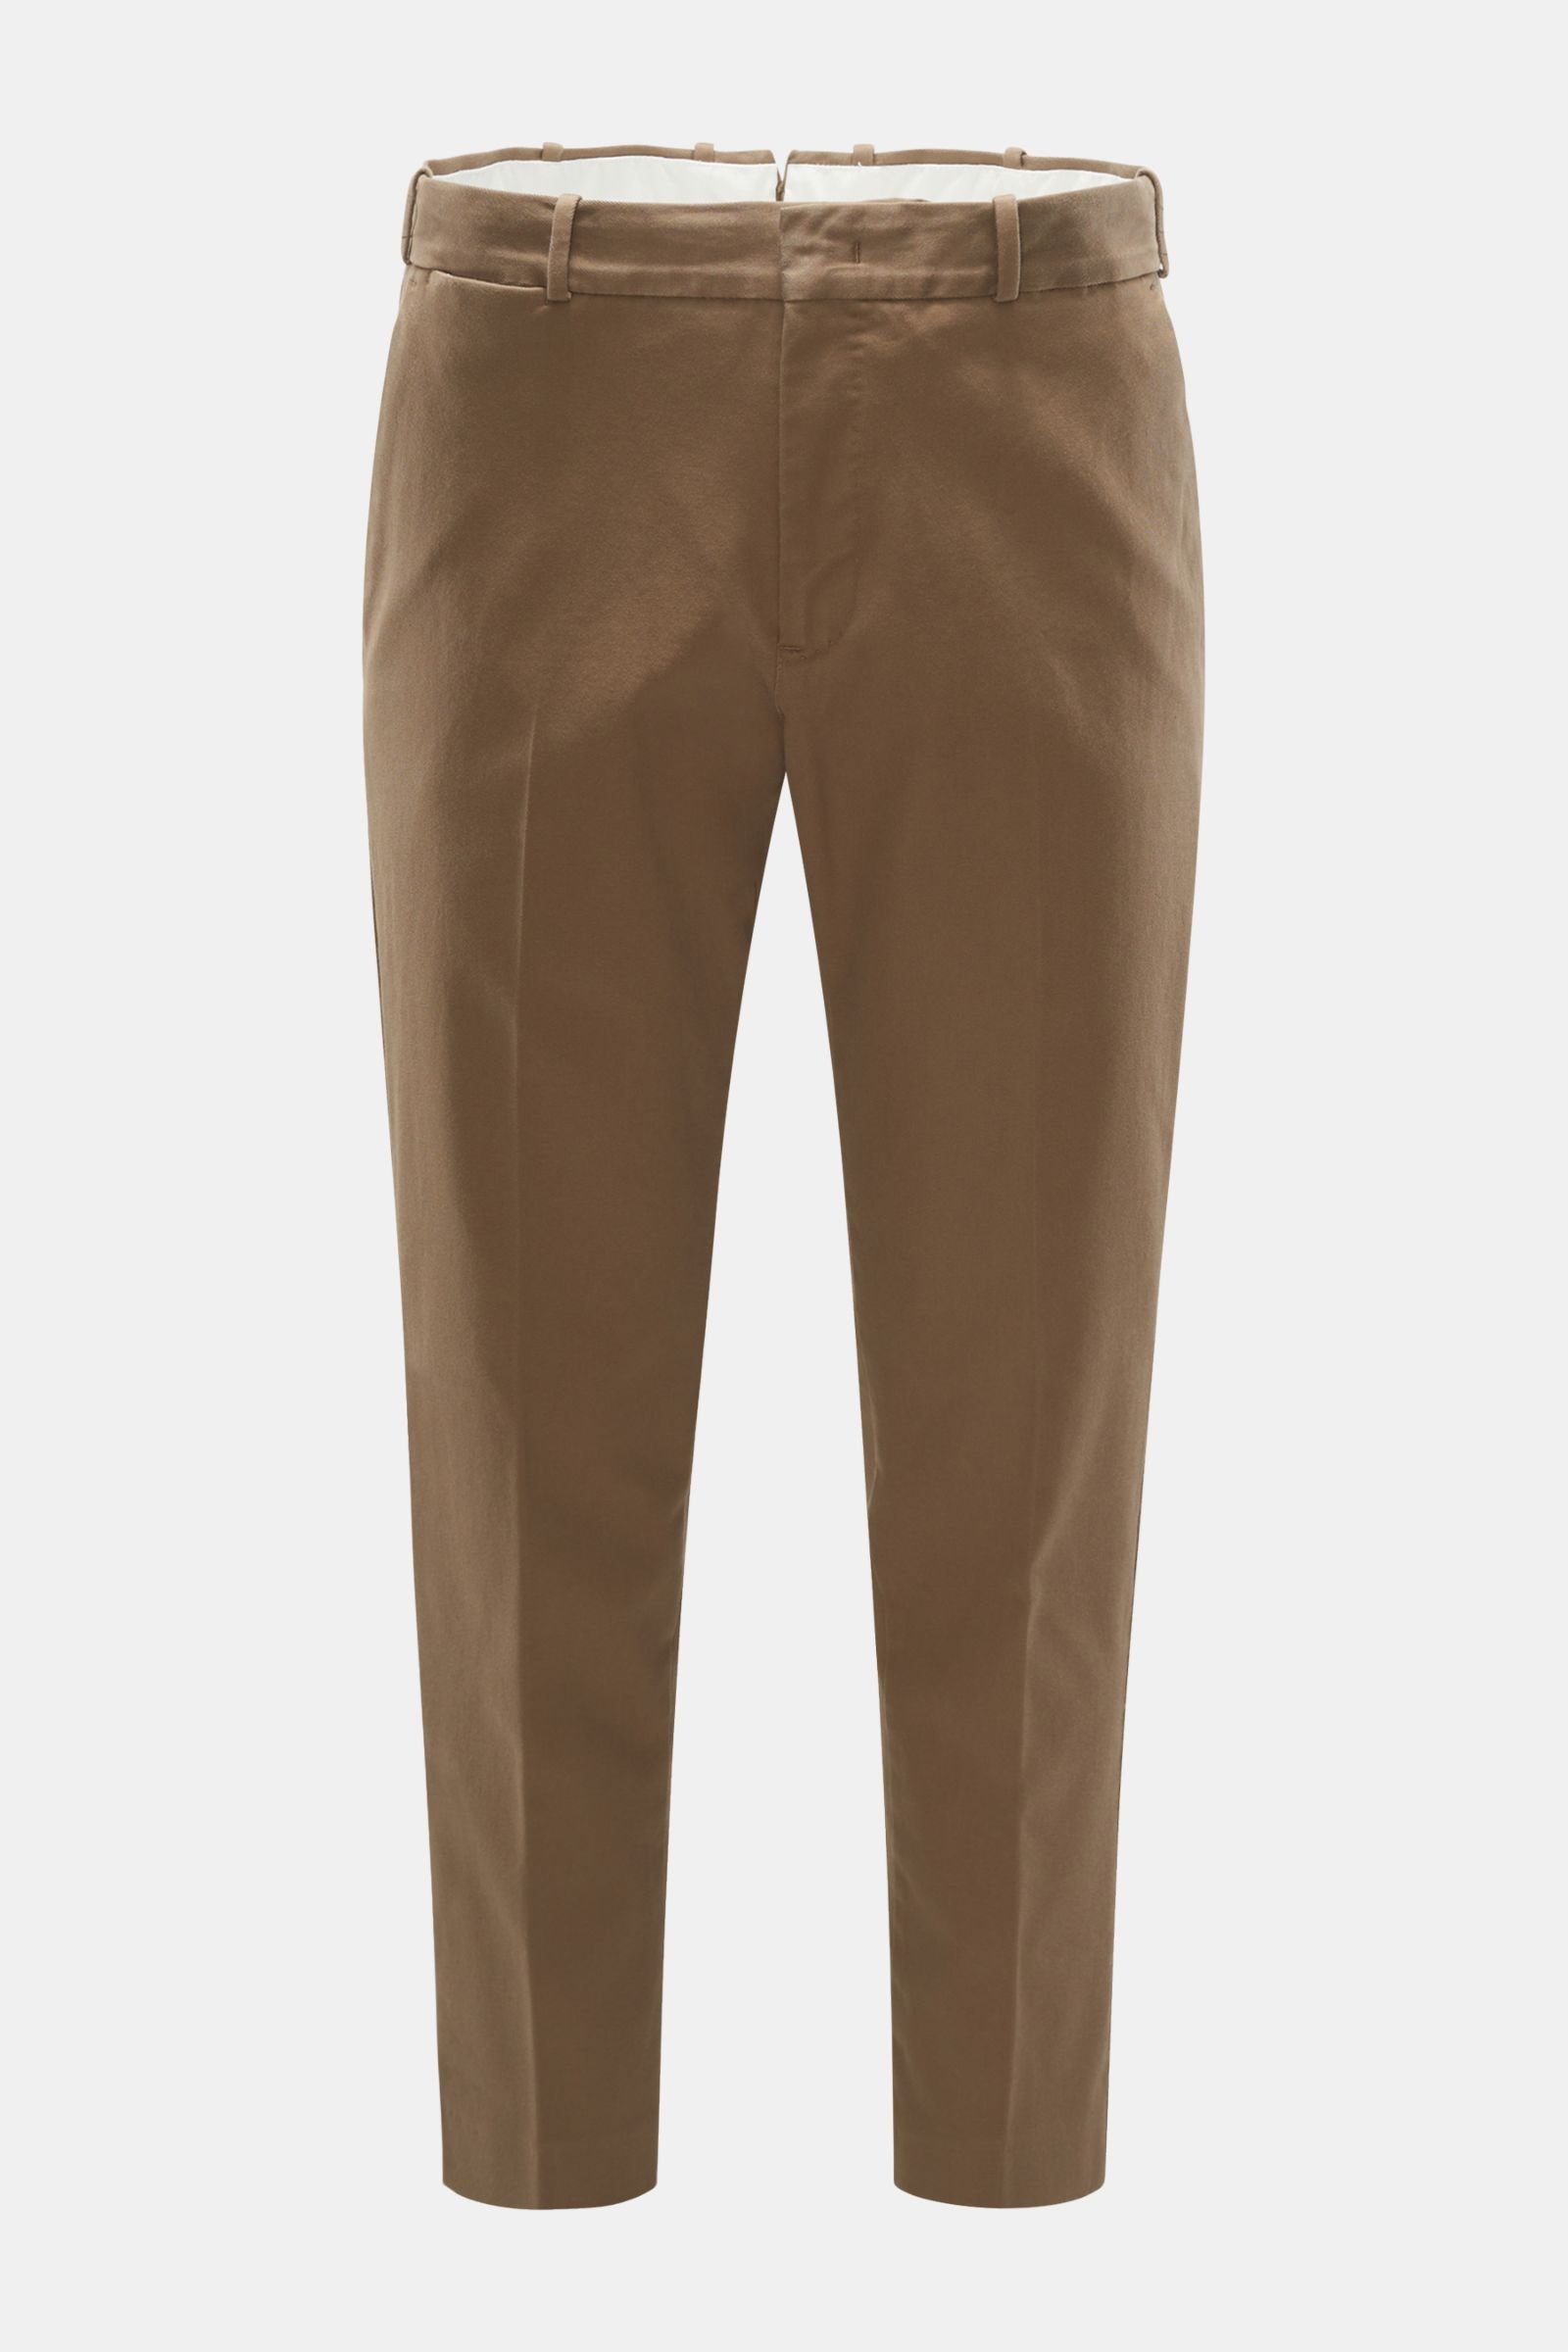 Cotton trousers 'Rebel Fit' grey-brown